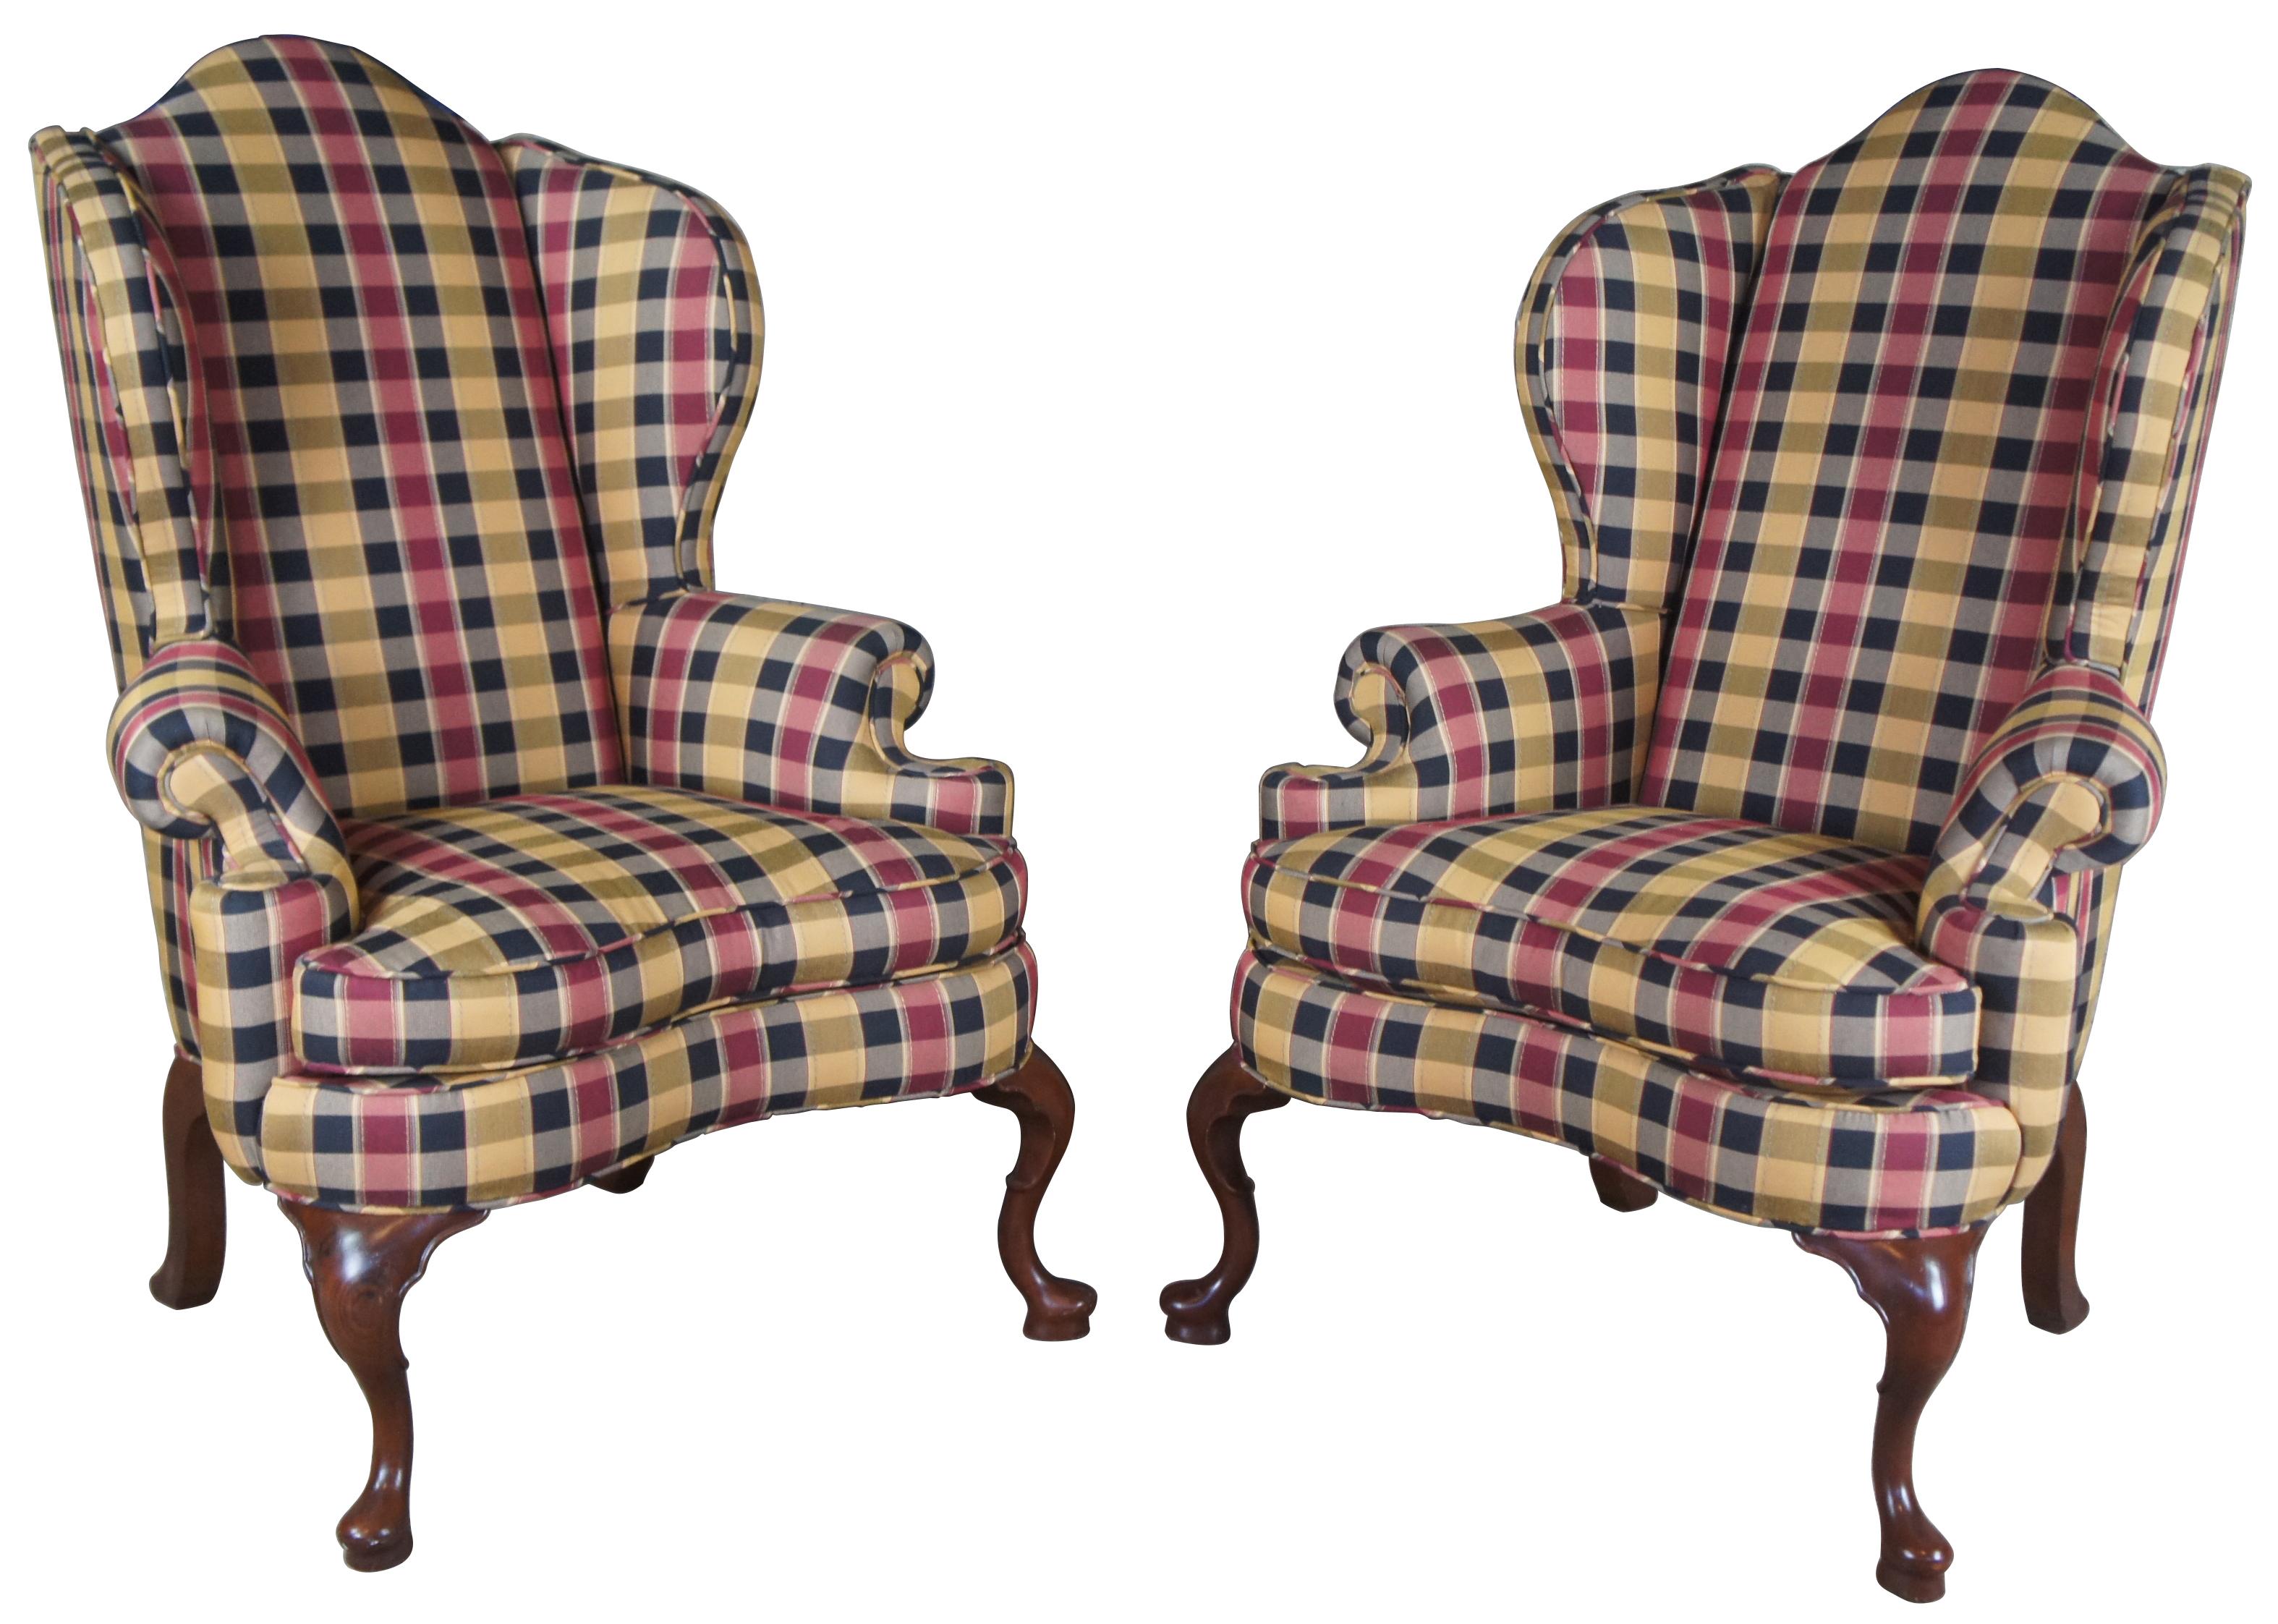 Pair of two mid century oversized wingback chairs. Made of mahogany with a wide stance, accented with rolled arms, camel back top and scrolled legs. Finished in a yellow, blue, grey, and red Ralph Lauren style plaid upholstery.
   